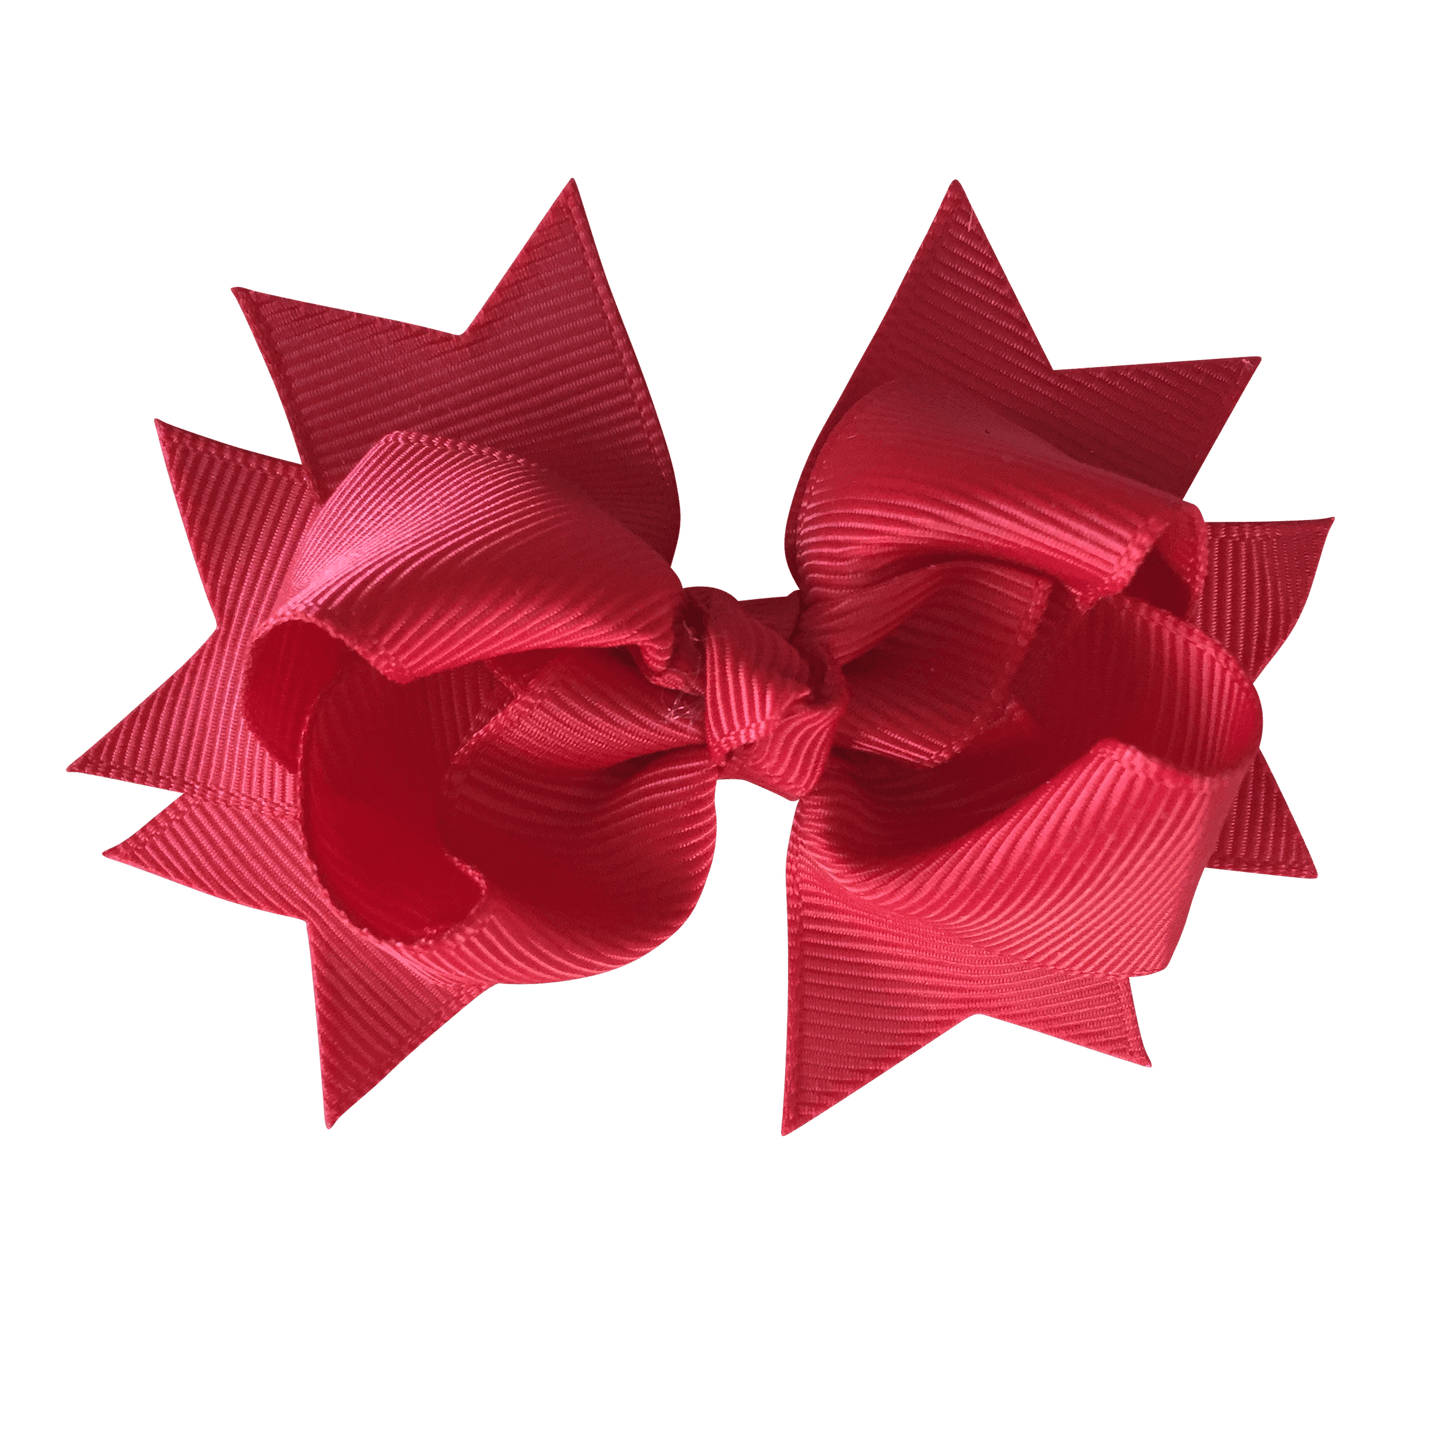 Ruby Hair Accessories - Ponytails and Fairytales